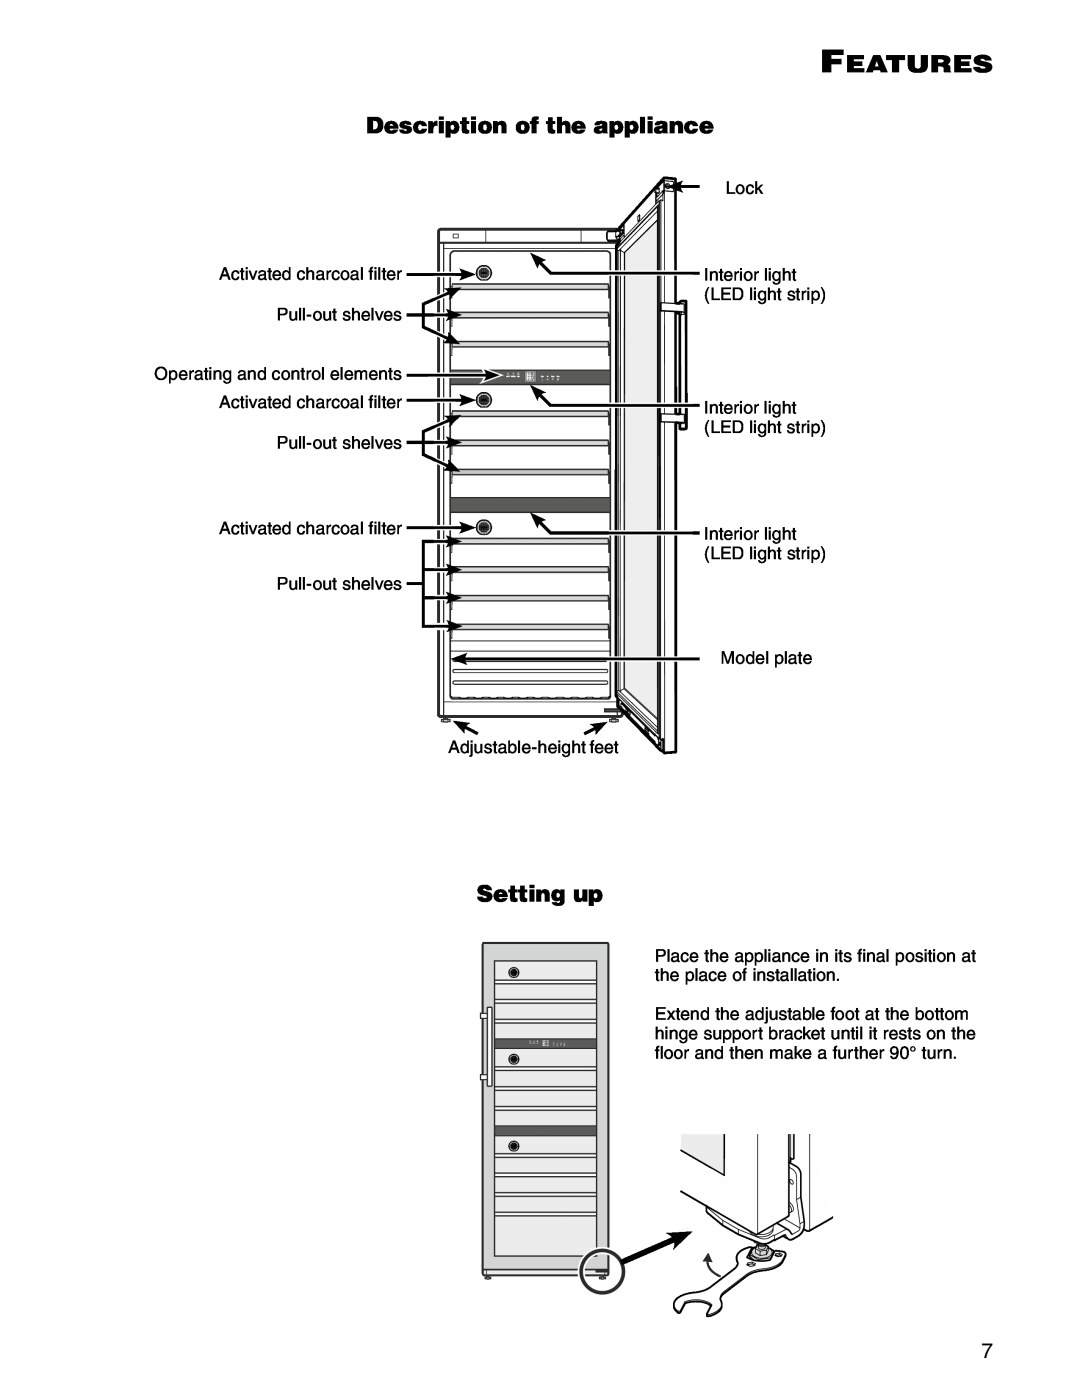 Liebherr WS 17800 manual Features, Description of the appliance, Setting up 